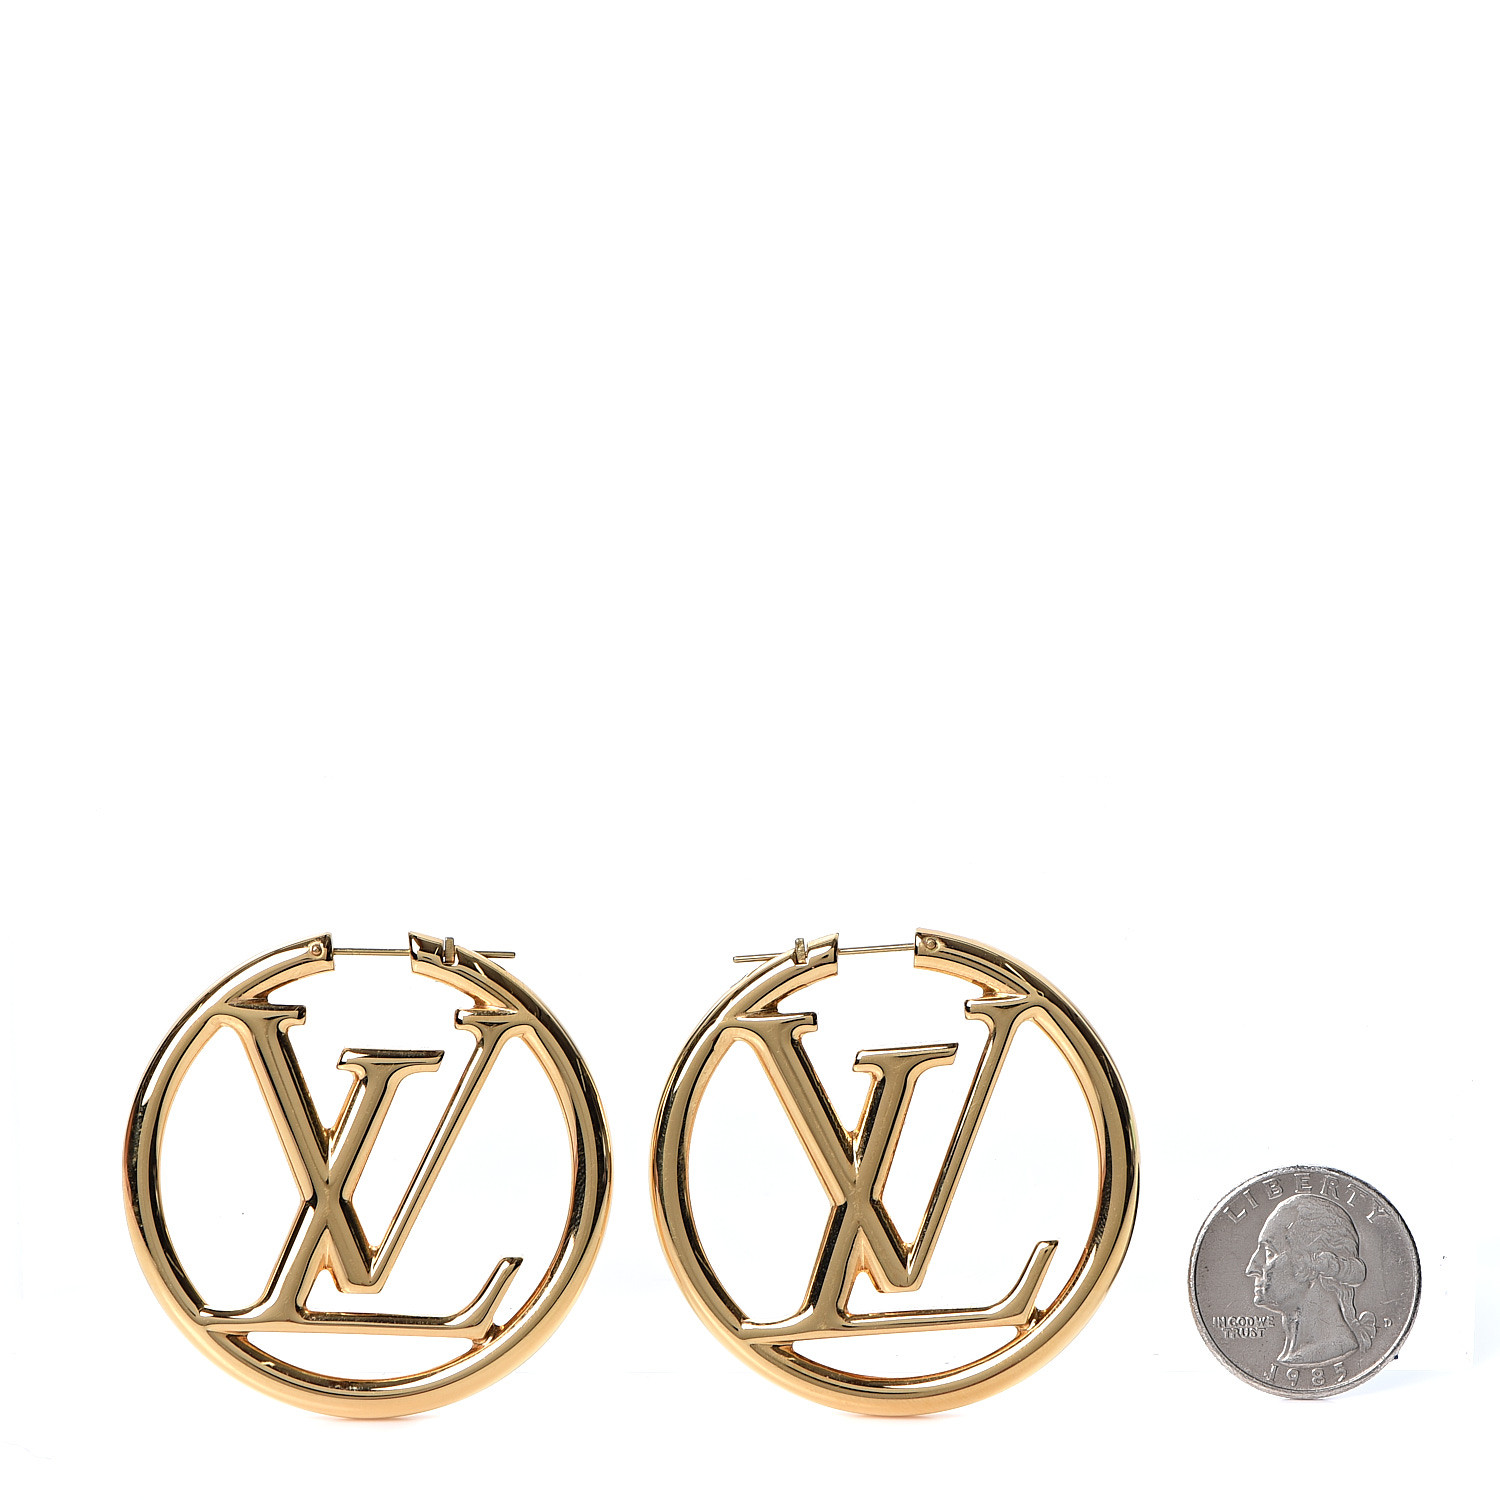 NIB ** LOUIS VUITTON - IDYLLE BLOSSOM EAR STUDS, PINK GOLD AND